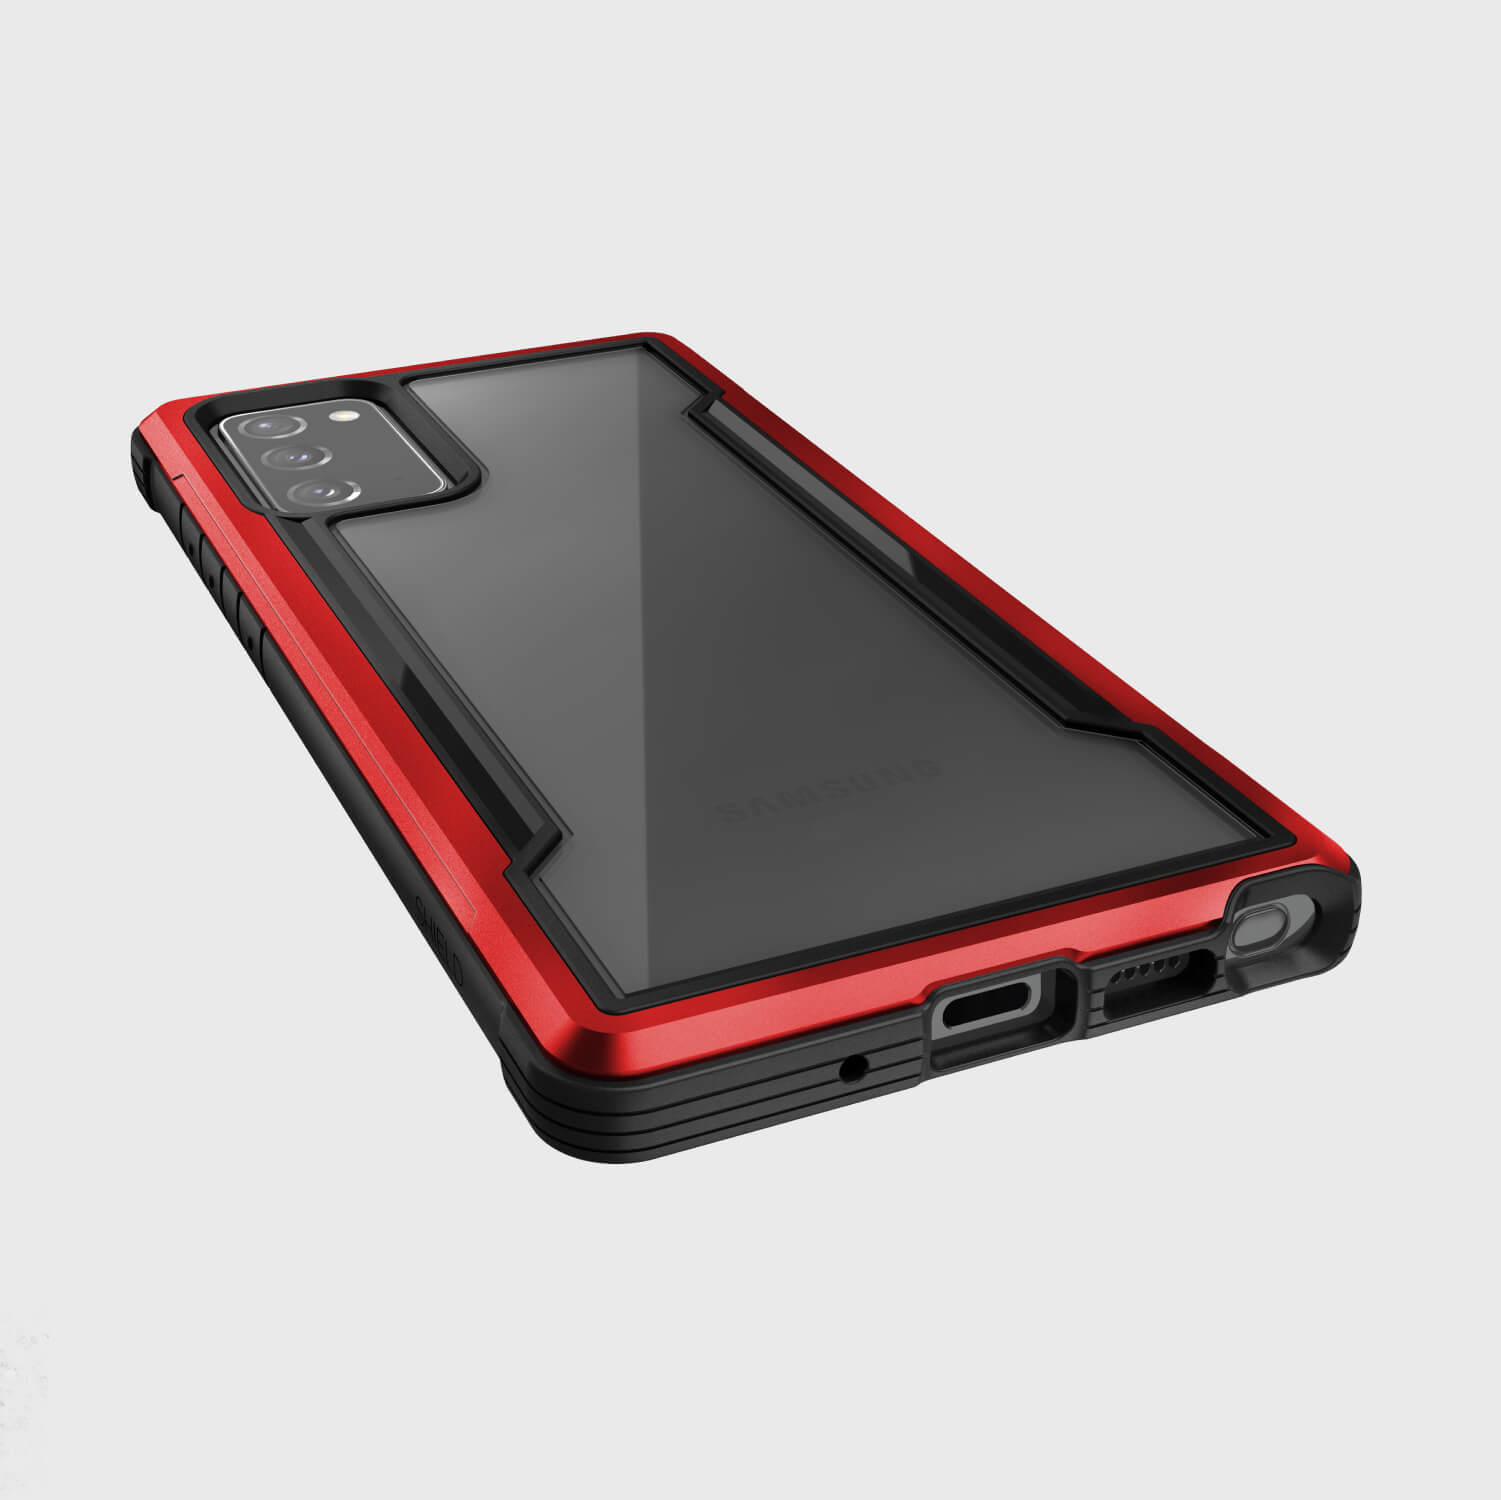 Get the ultimate X-Doria Samsung Galaxy Note 20 Case - SHIELD Red in red and black, offering military-grade drop protection and free shipping. Experience peace of mind knowing your phone is safeguarded from drops on concrete.